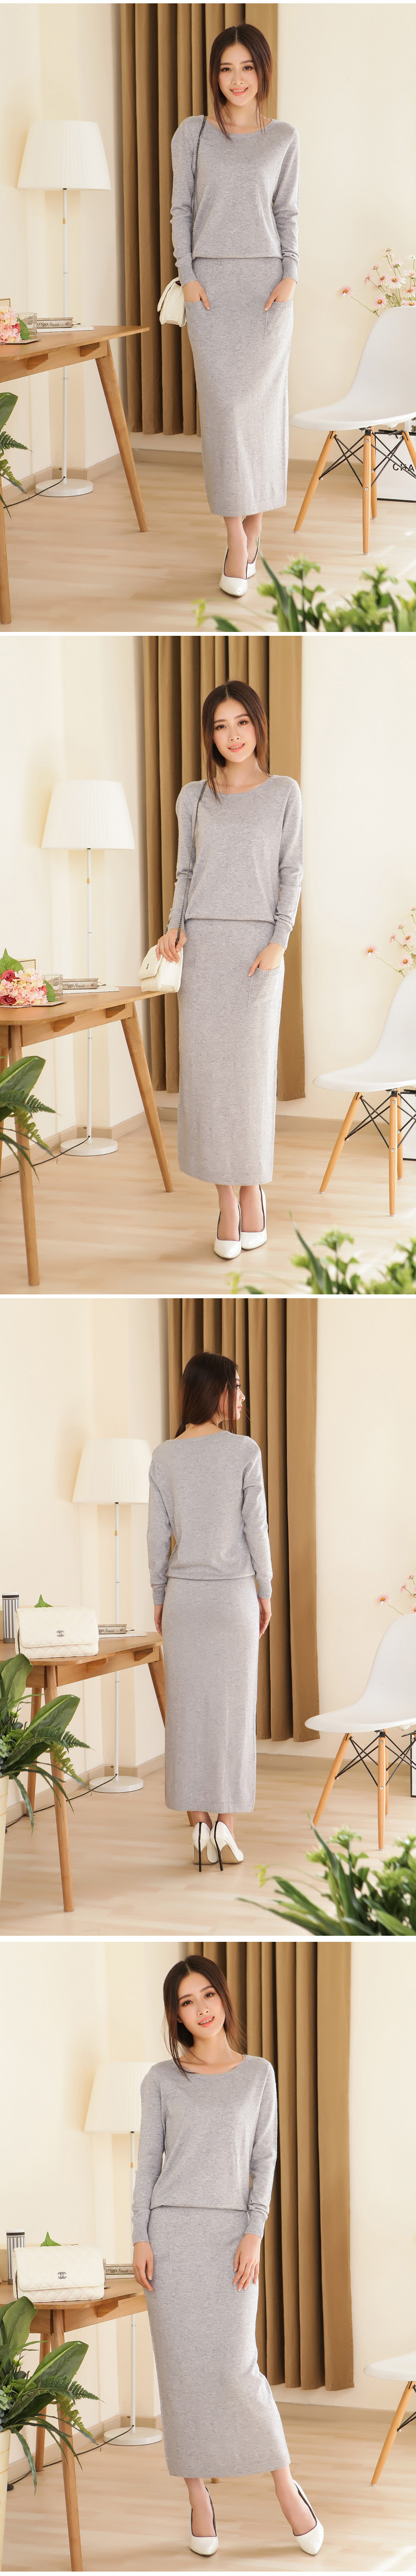 2016-New-Spring-and-Autumn-Female-Round-neck-Floor-length-Cashmere-Sweater--One-piece-Dress-Casual-S-1919590878